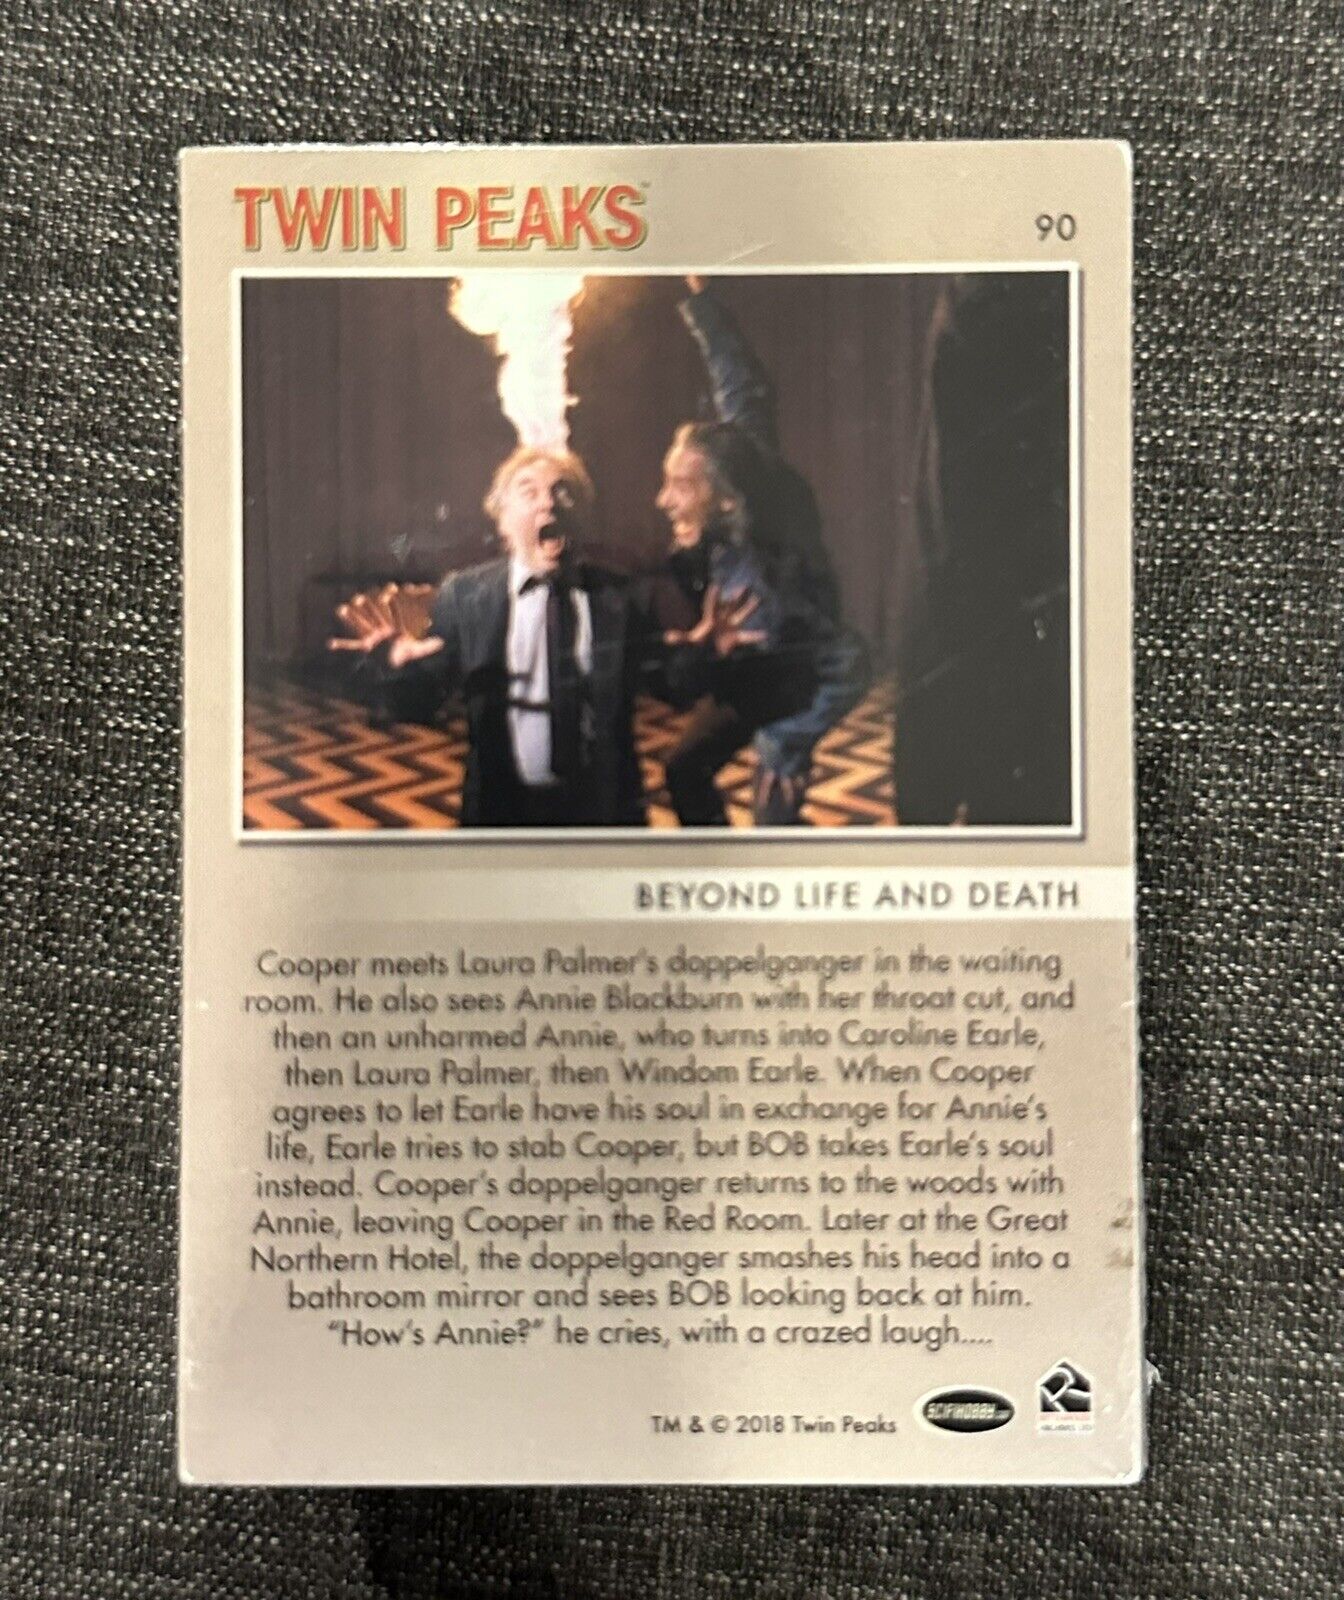 TWIN PEAKS 2018 Rittenhouse Trading Cards Complete 90 Card Base Set- SEALED MINT